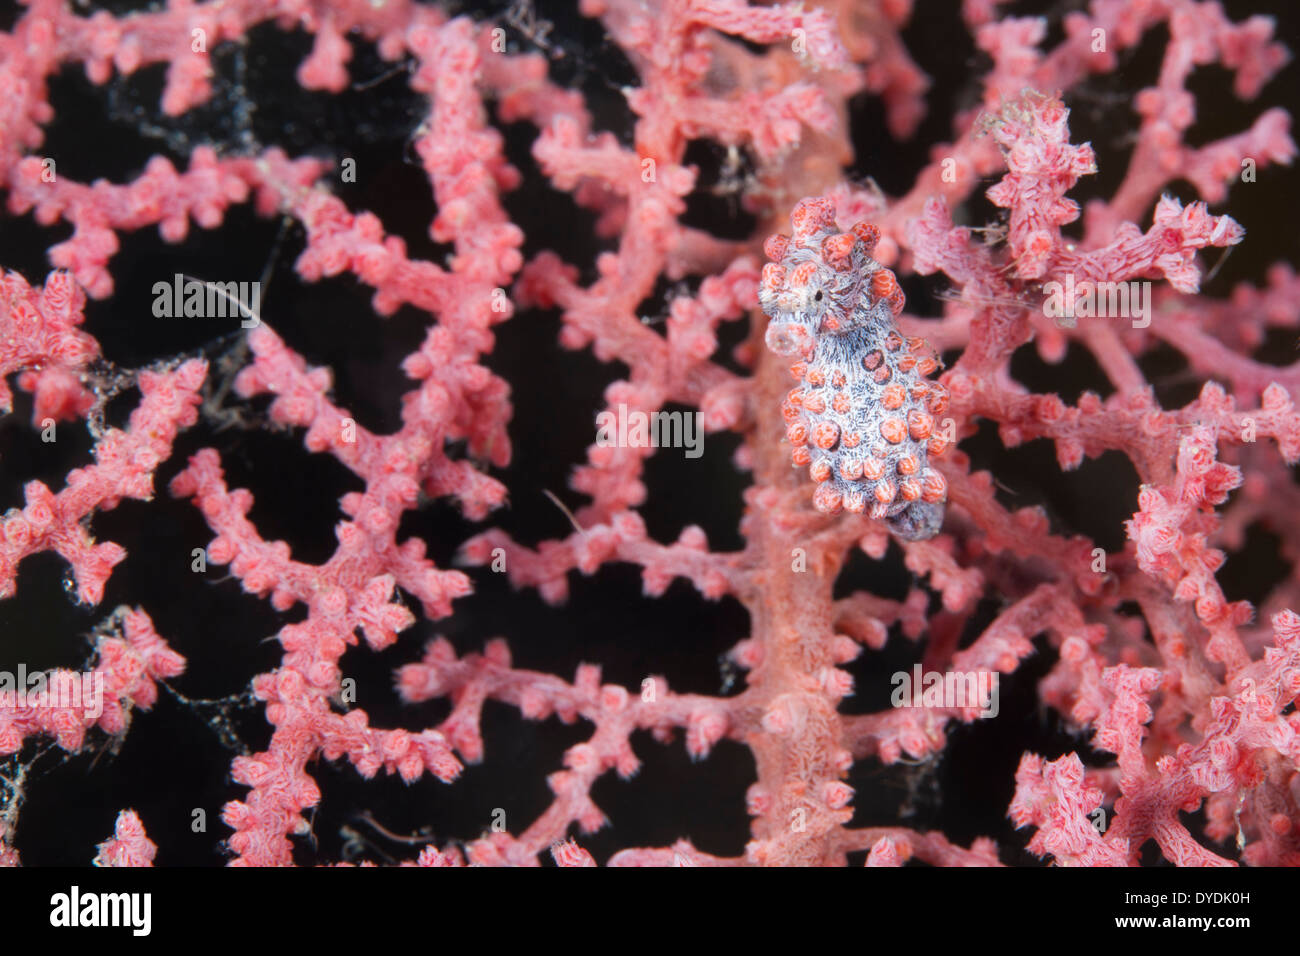 Bargibant's Pygmy Seahorse (Hippocampus bargibanti) on a Gorgonian Sea Fan (Muricella sp.) in the Lembeh Strait Stock Photo